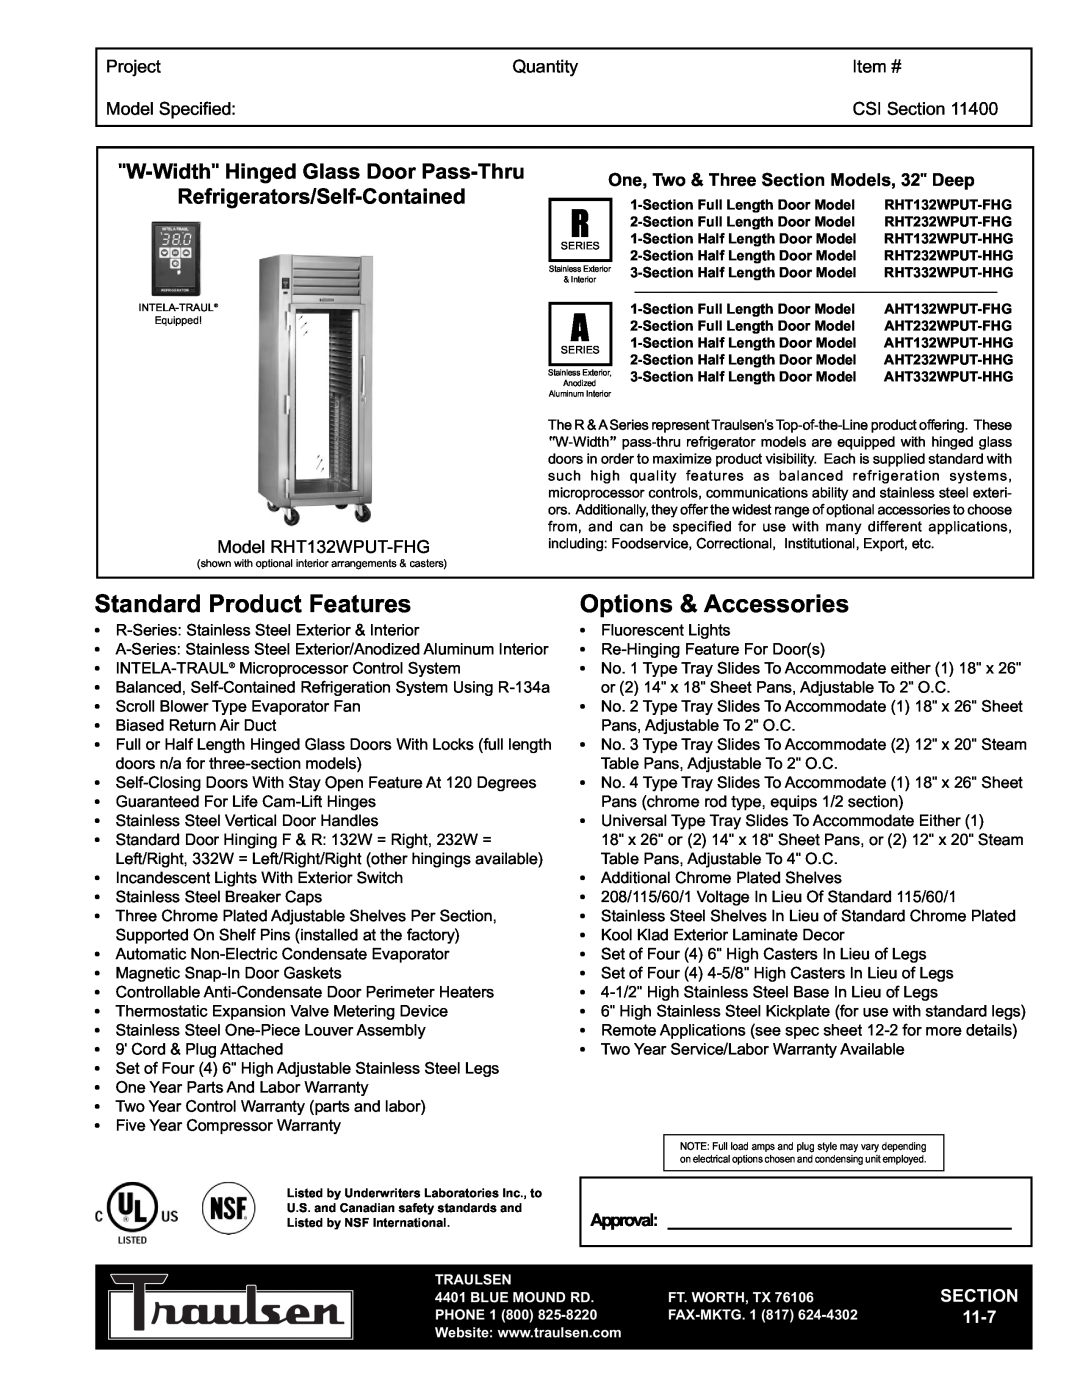 Traulsen RHT132WPUT-FHG warranty W-Width Hinged Glass Door Pass-Thru, Refrigerators/Self-Contained, Project, Quantity 